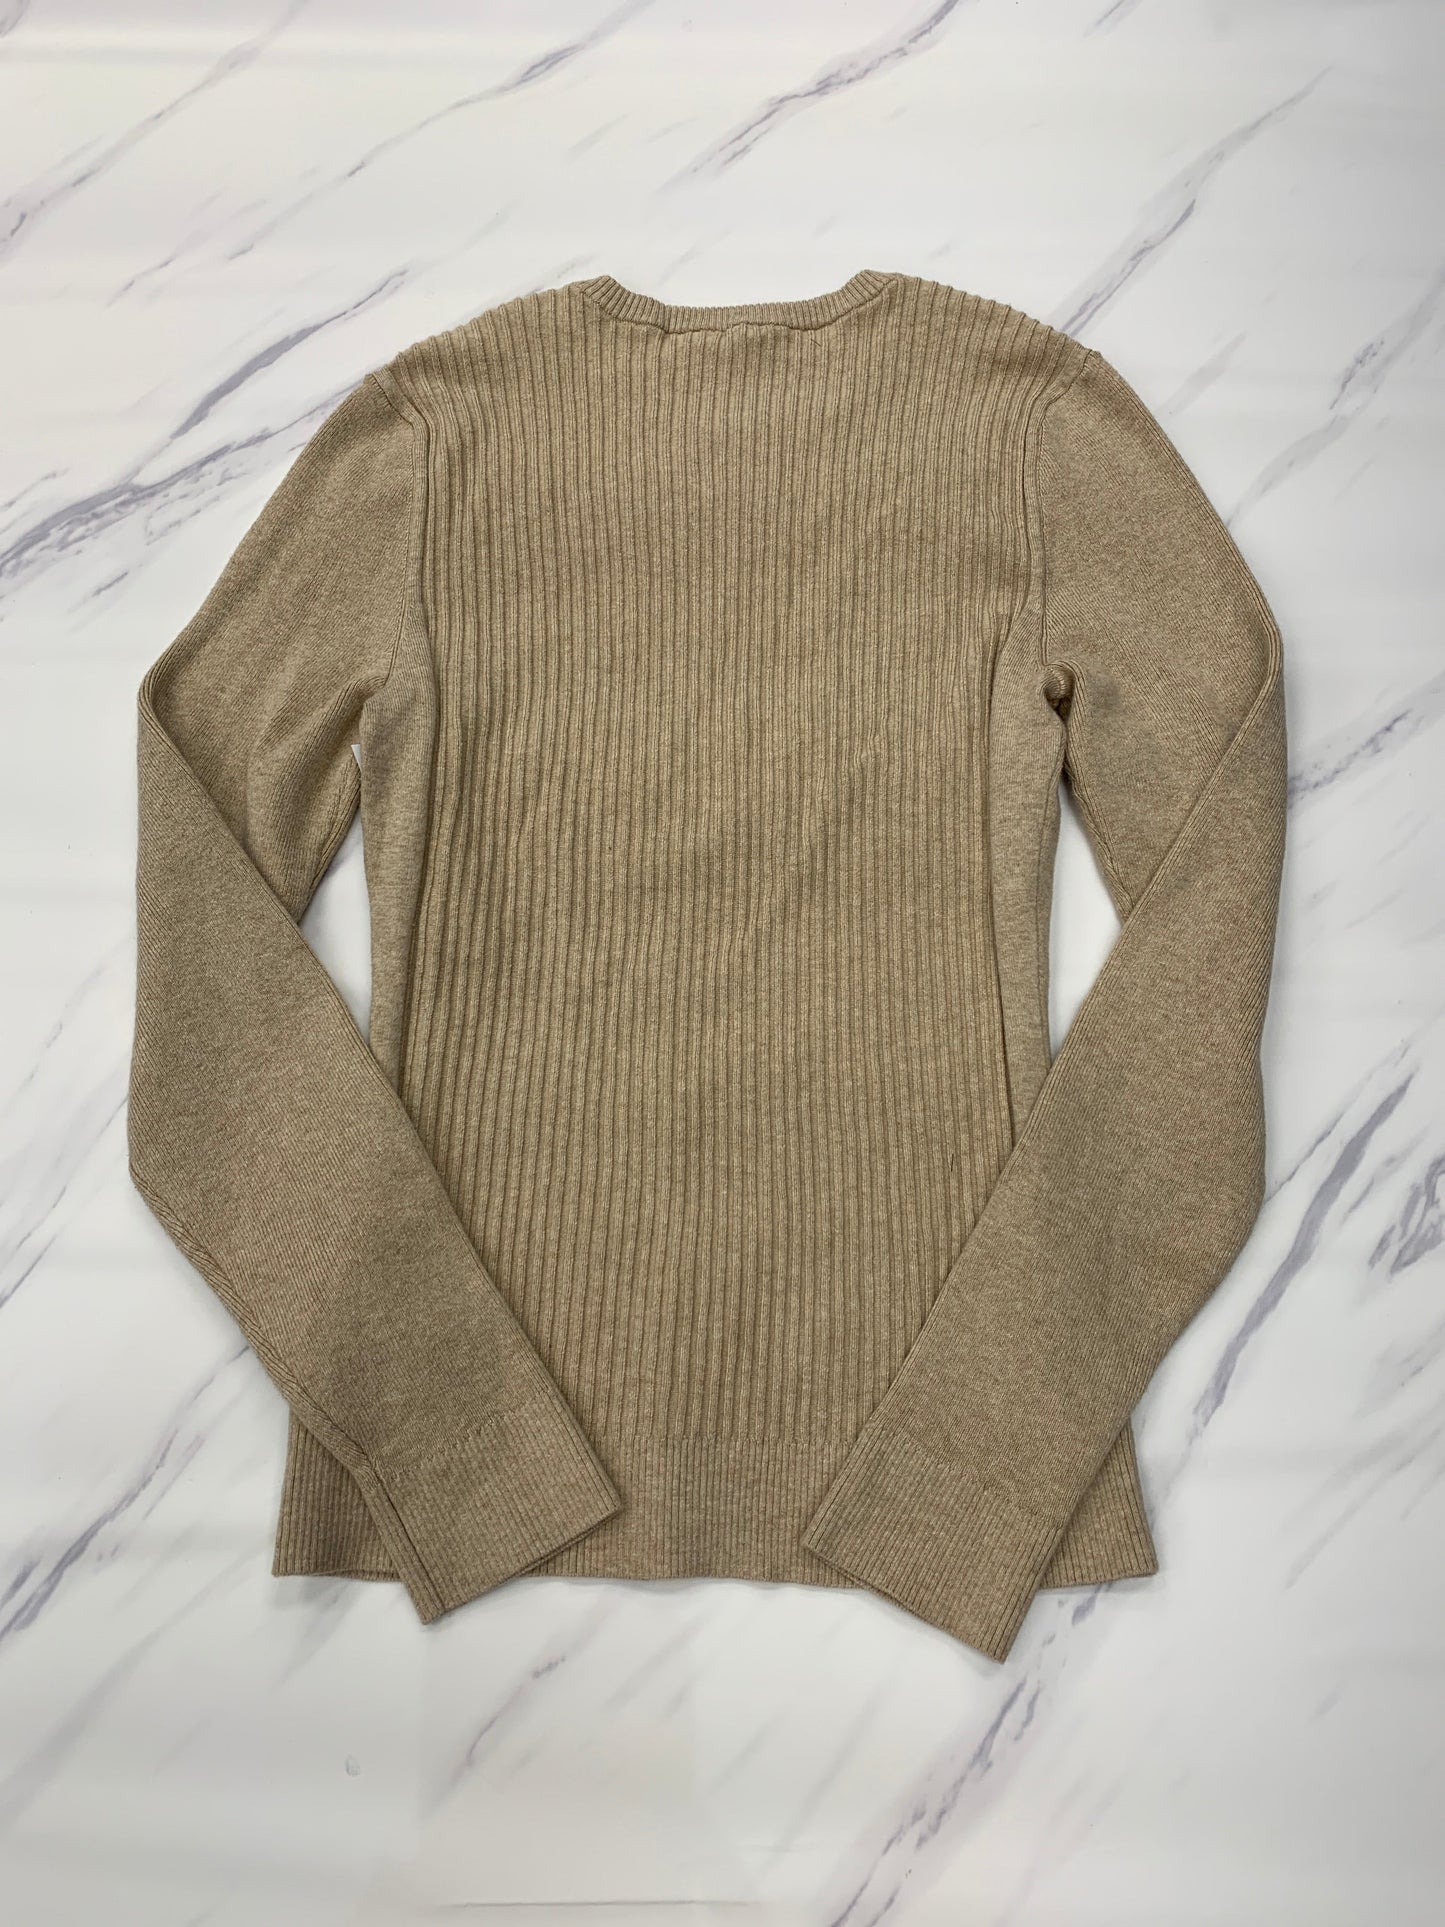 Sweater By J Mclaughlin  Size: S